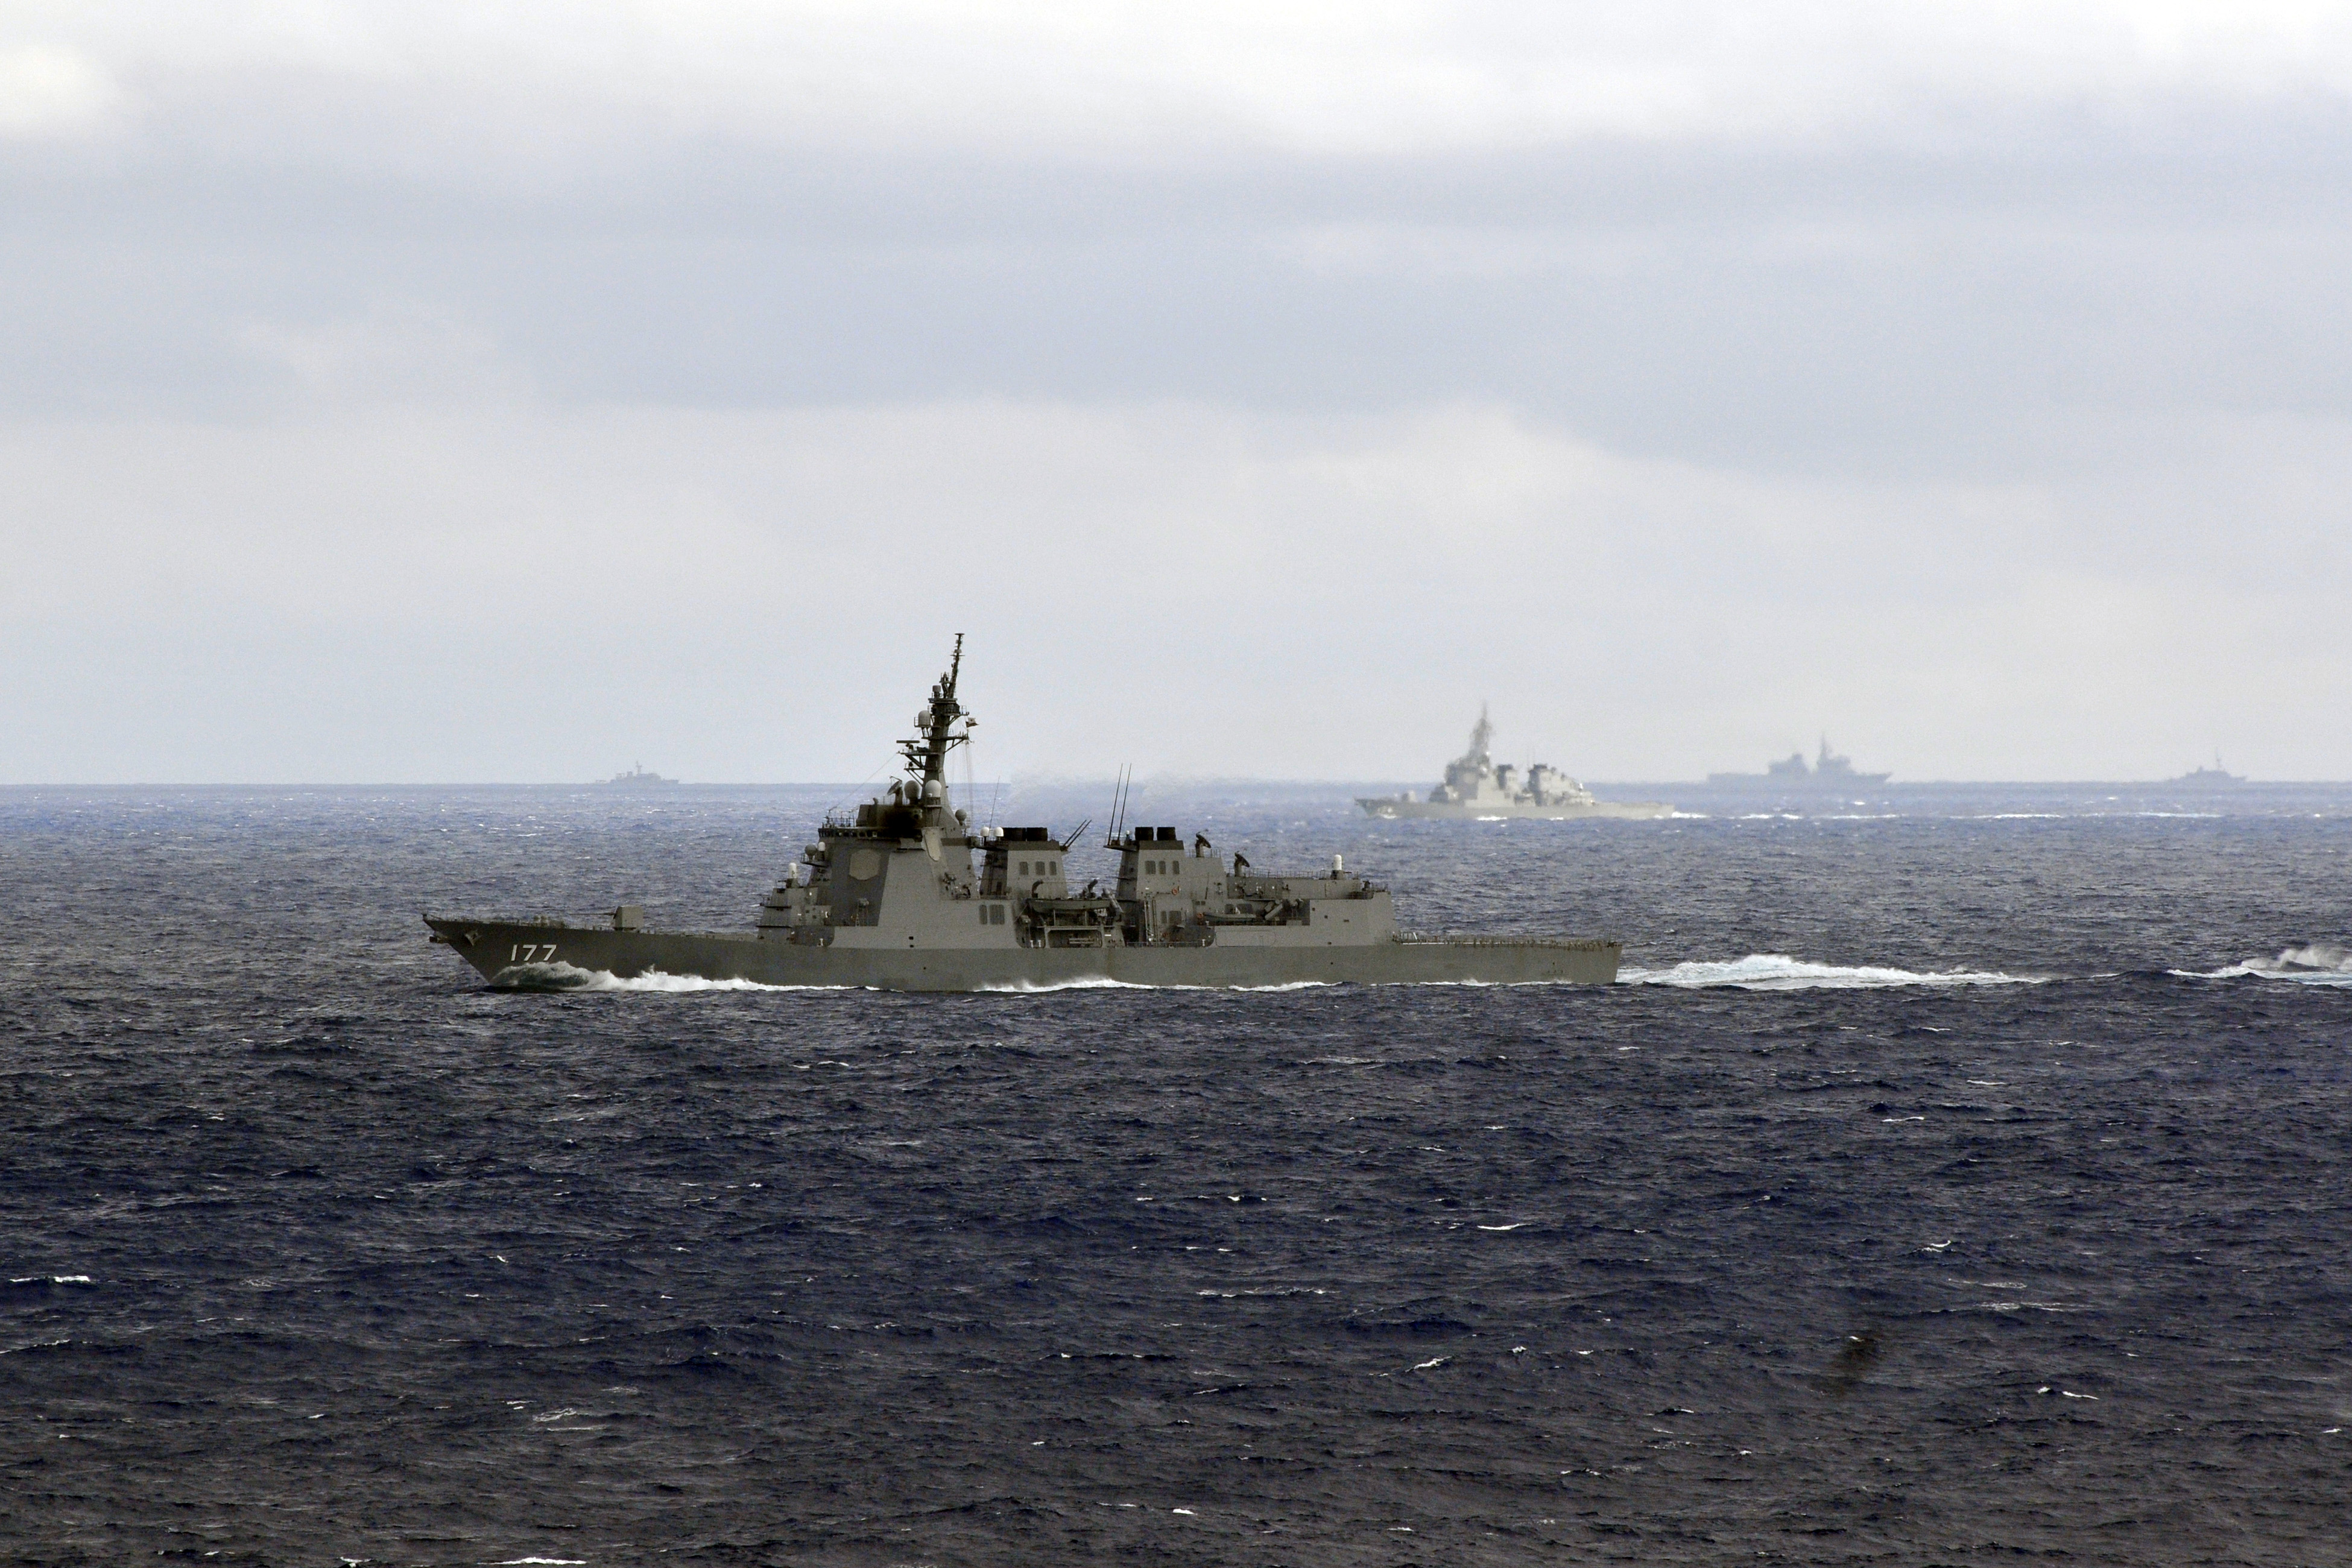 The Japan Maritime Self-Defense Force (JMSDF) guided-missile defense destroyer JDS Atago (DDG-177) maneuvers with other JMDSF and U.S. Navy ships belonging to the USS George Washington carrier strike group in 2011. US Navy Photo